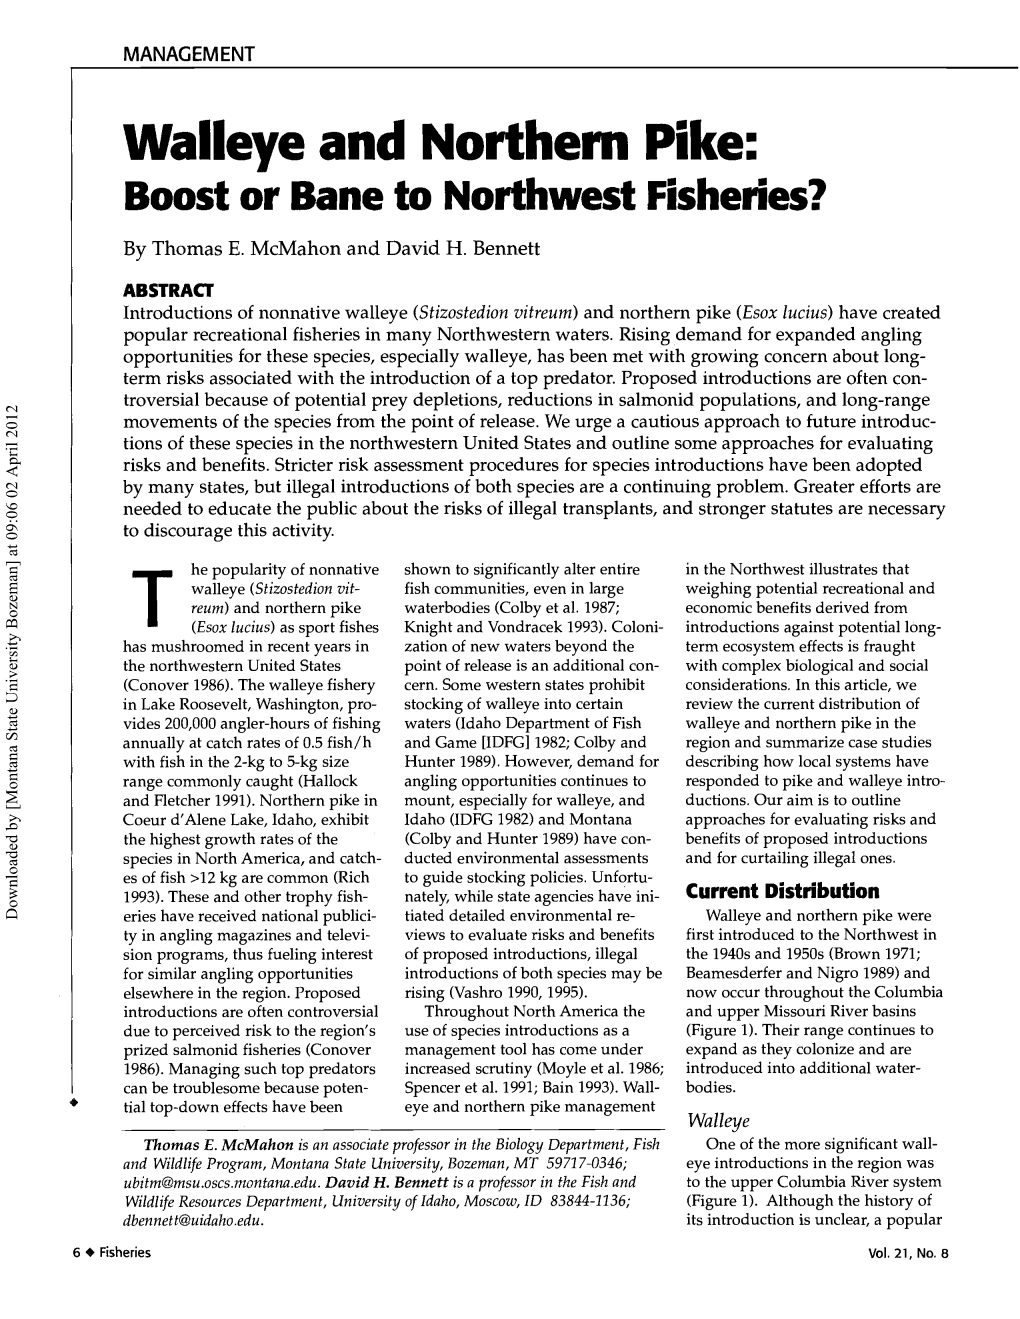 Walleye and Northern Pike: Boost Or Bane to Northwest Fisheries?